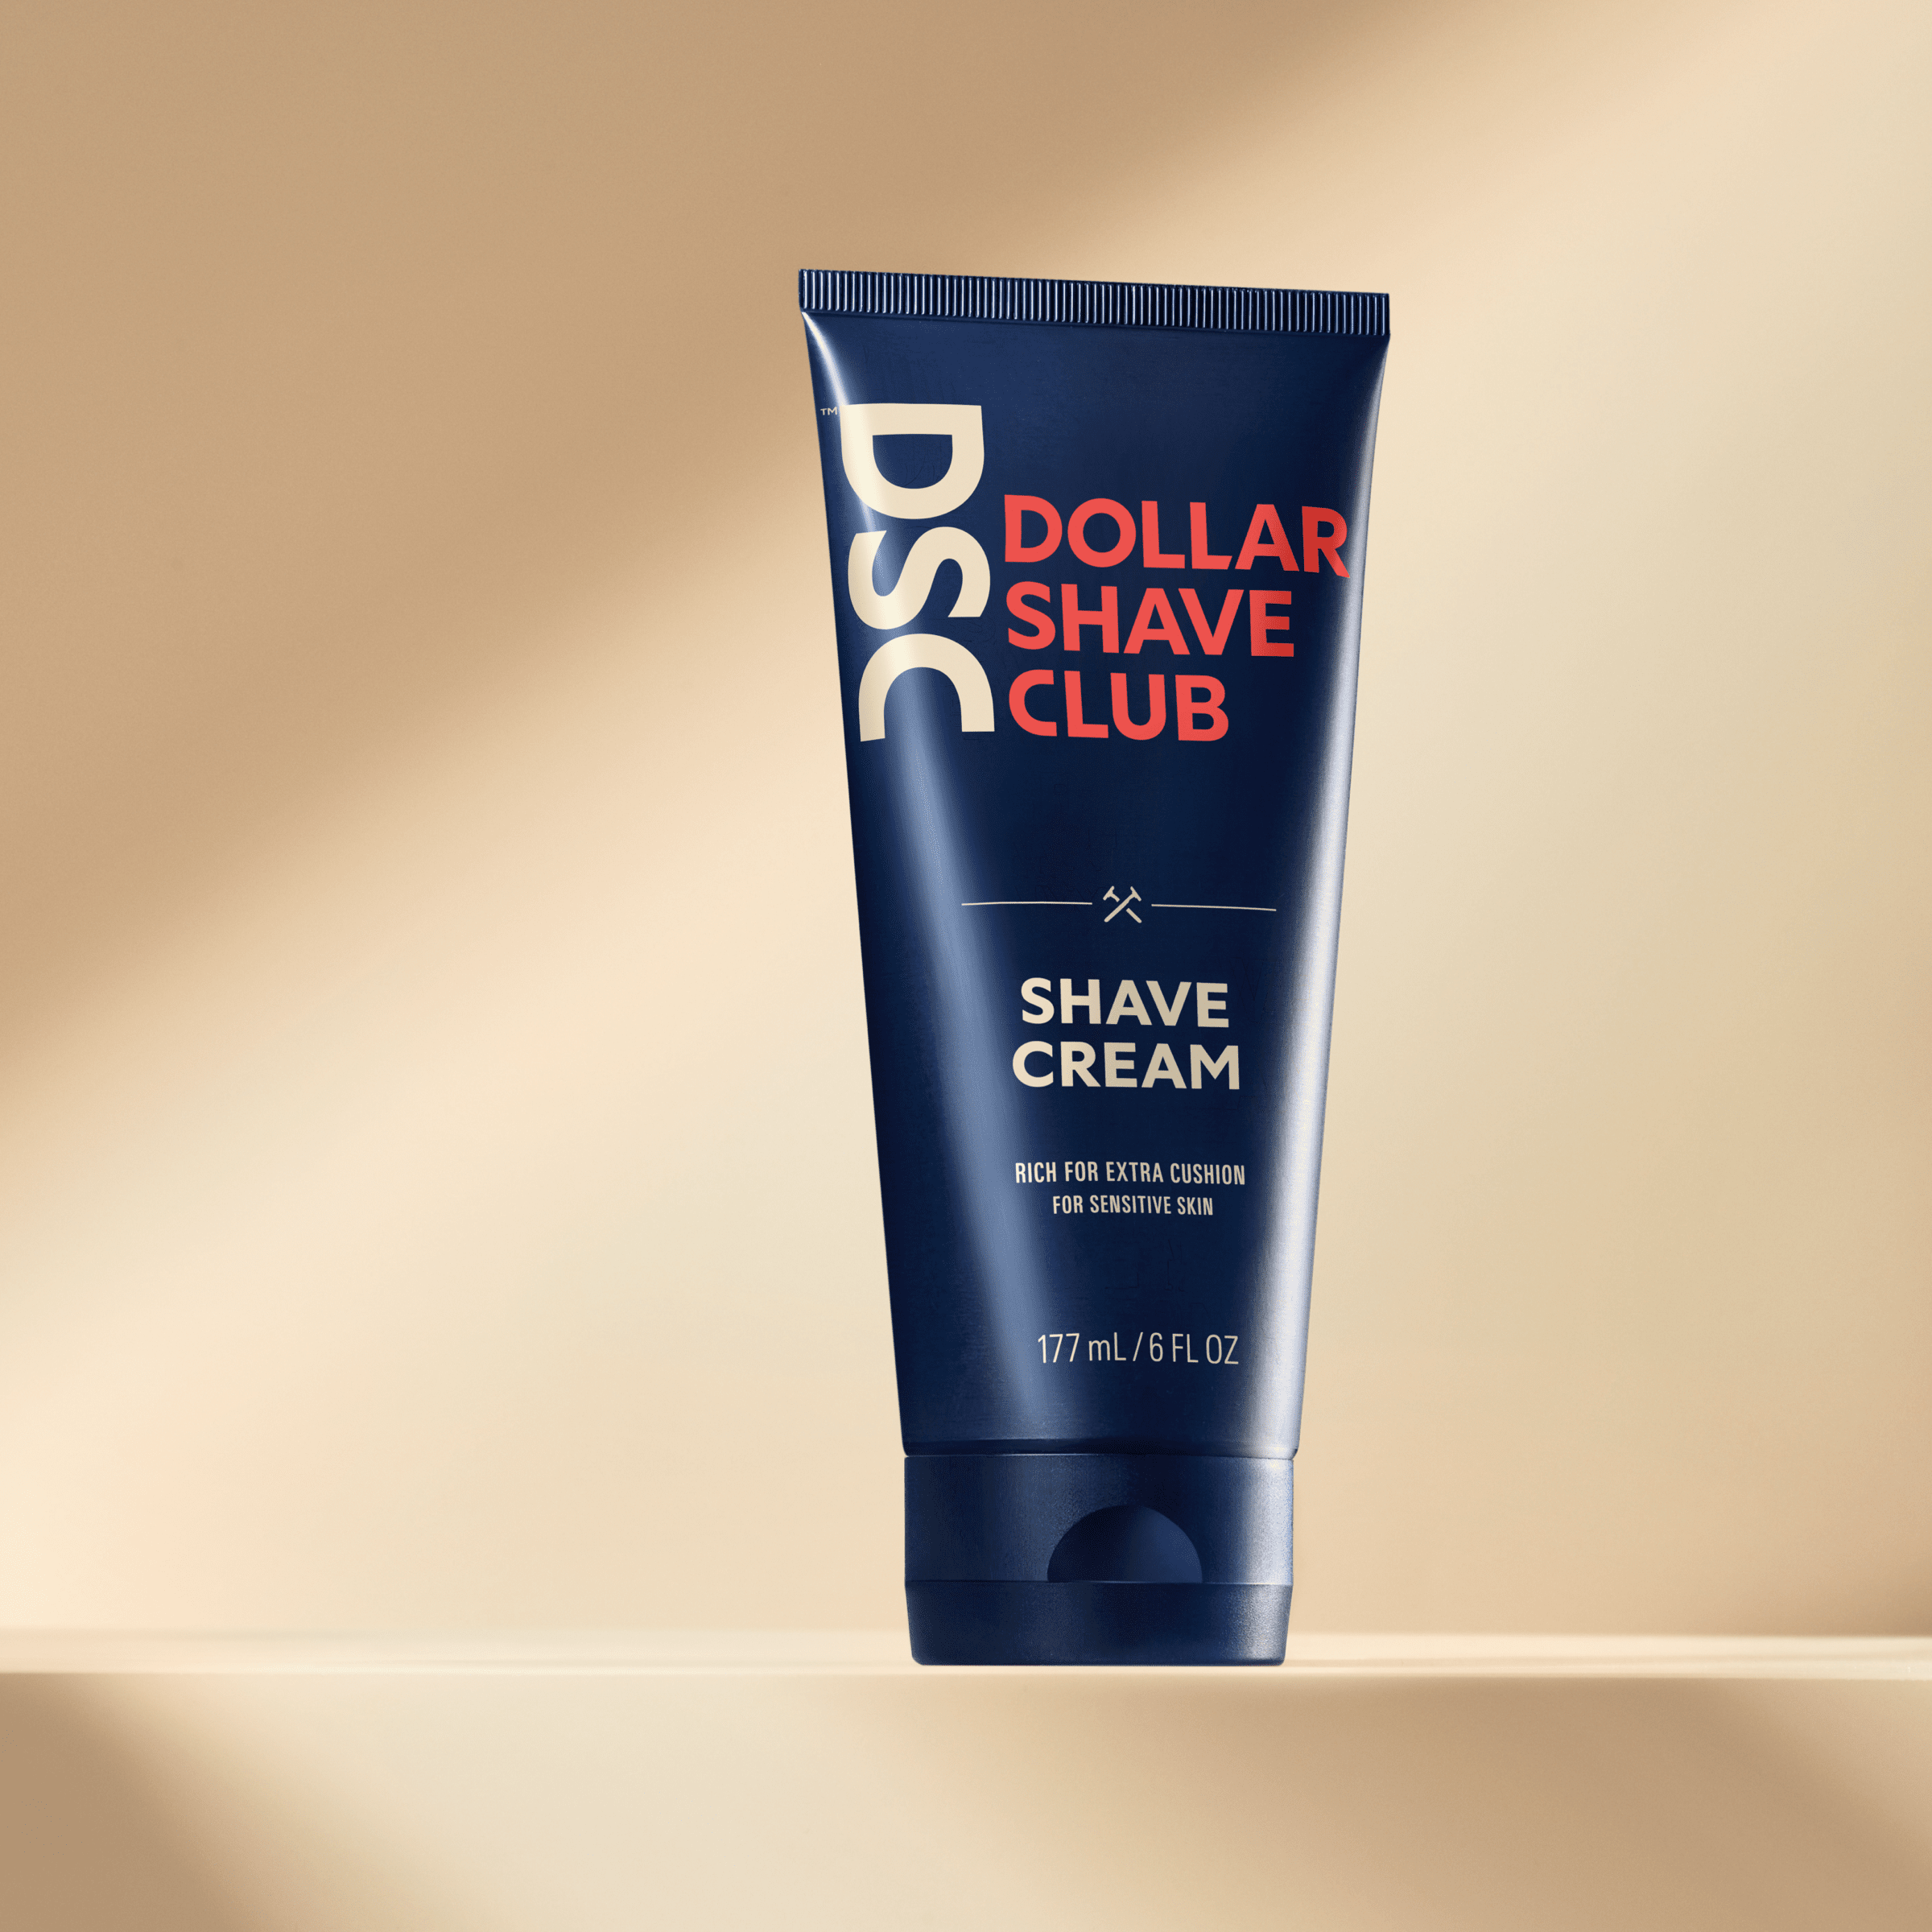 Dollar Shave Club Shave Cream product image against tan backdrop.